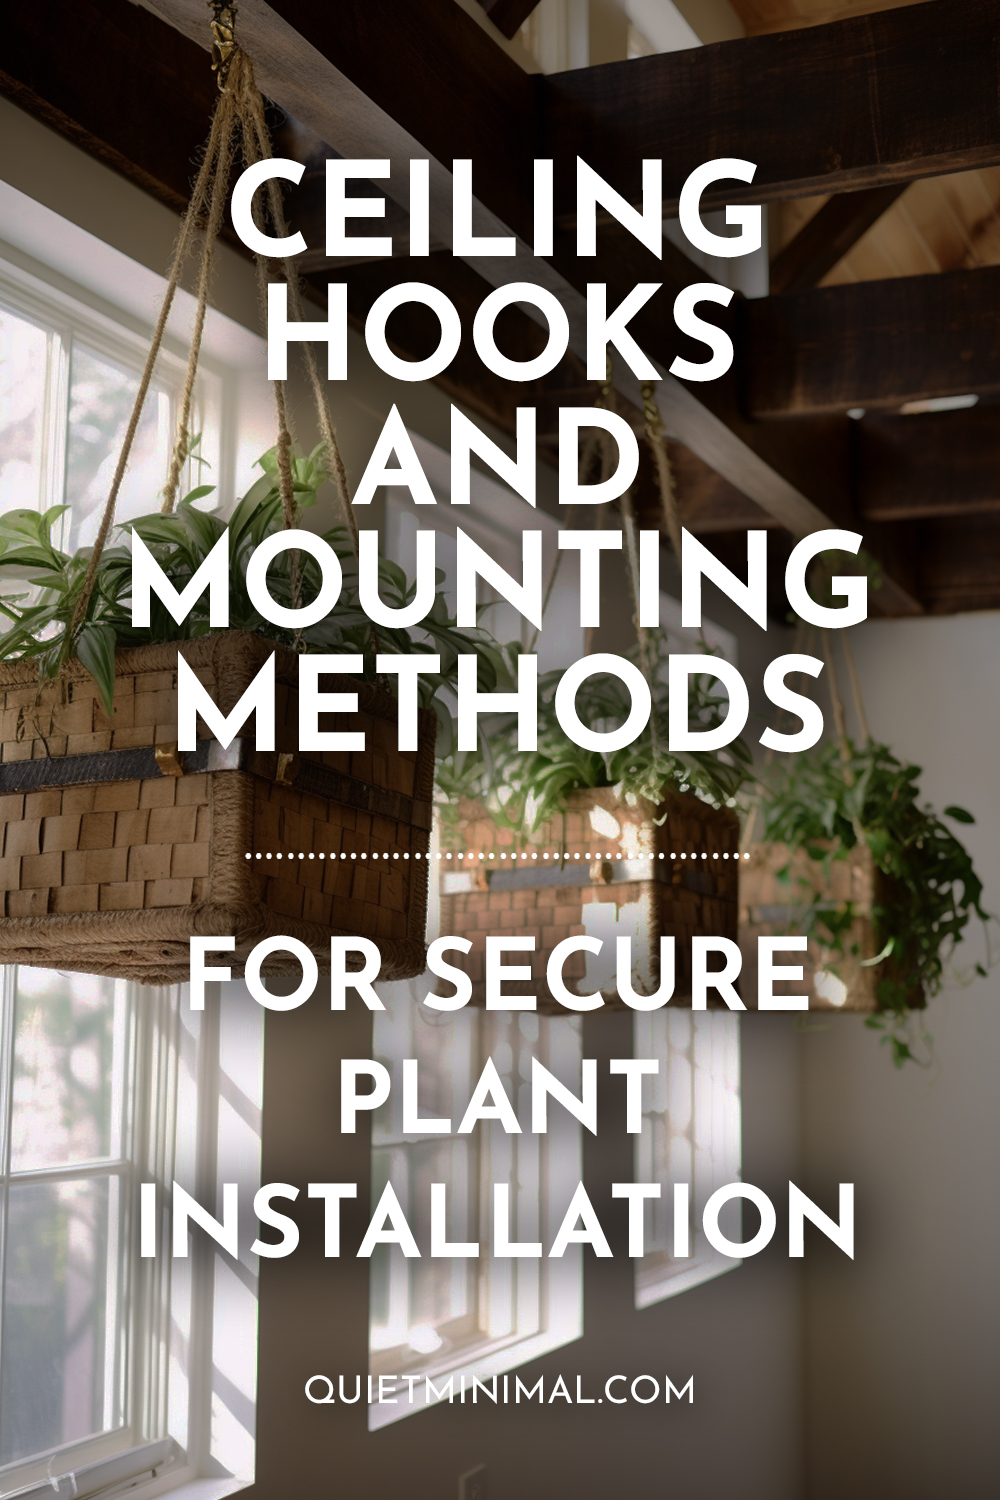 Ceiling hooks and mounting methods for secure plant installation.